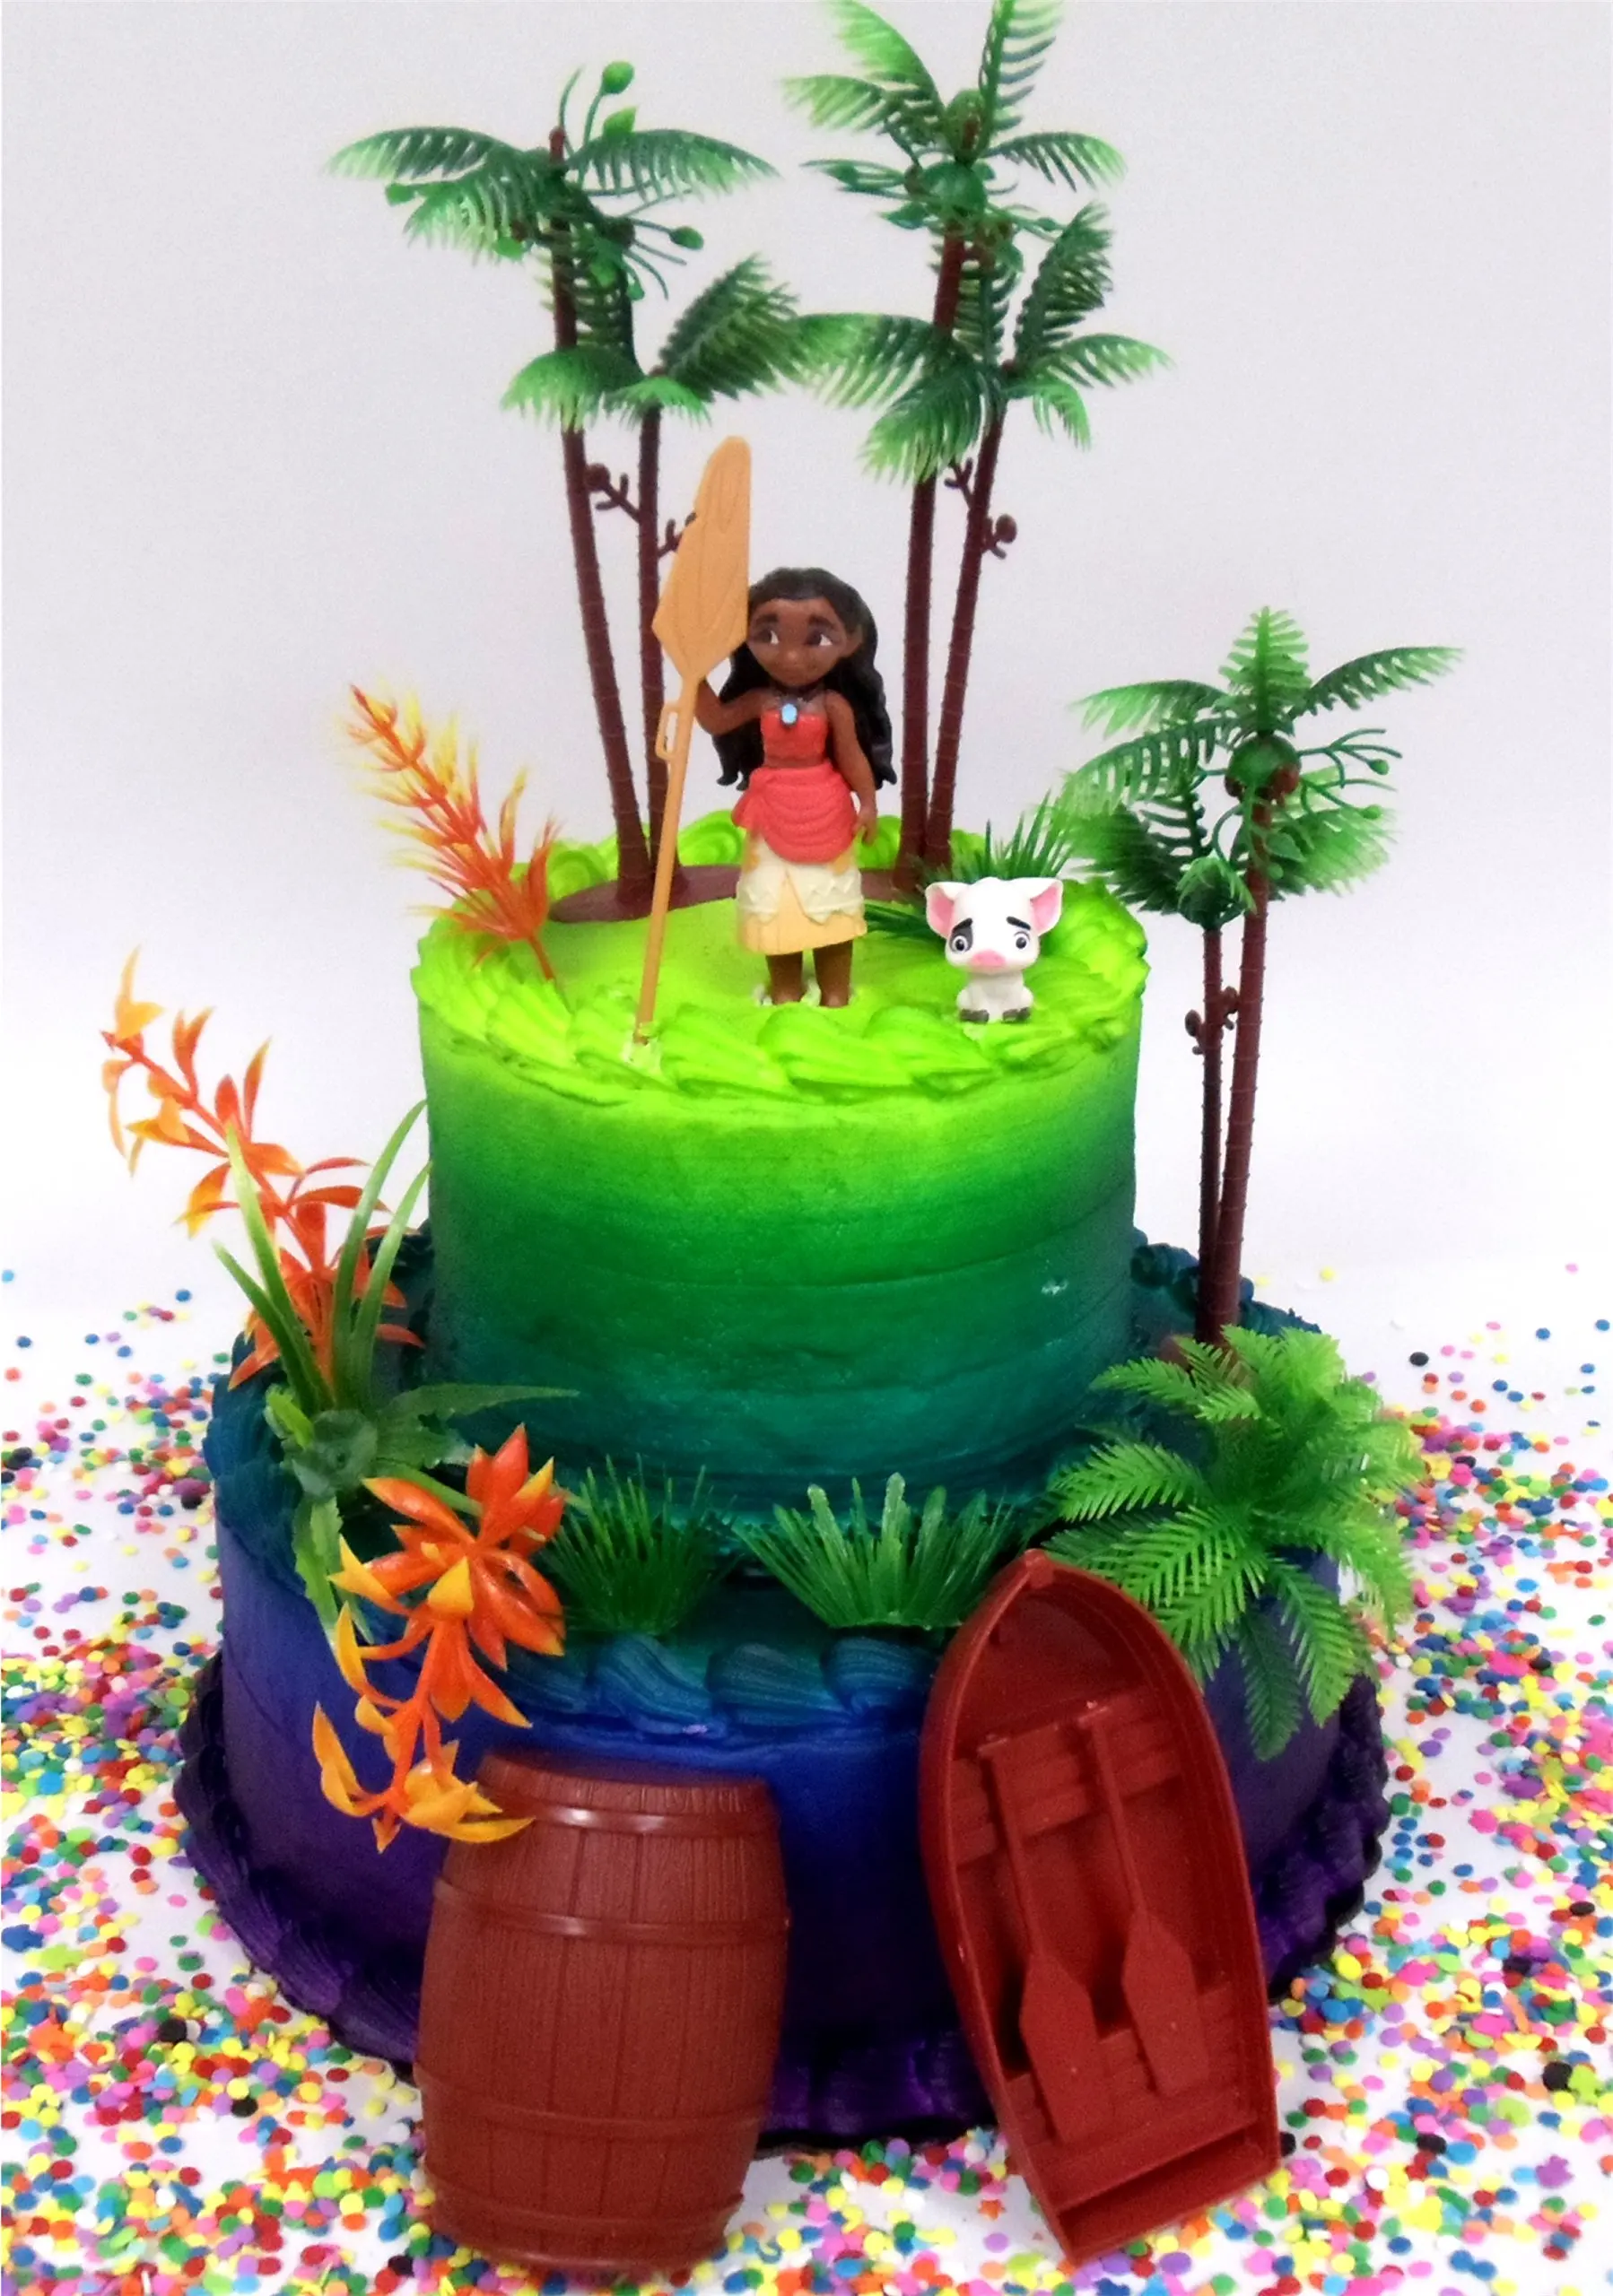 Buy Moana Tropical Themed Moana Birthday Cake Topper Set Featuring Moana Figure And Decorative Accessories In Cheap Price On Alibaba Com